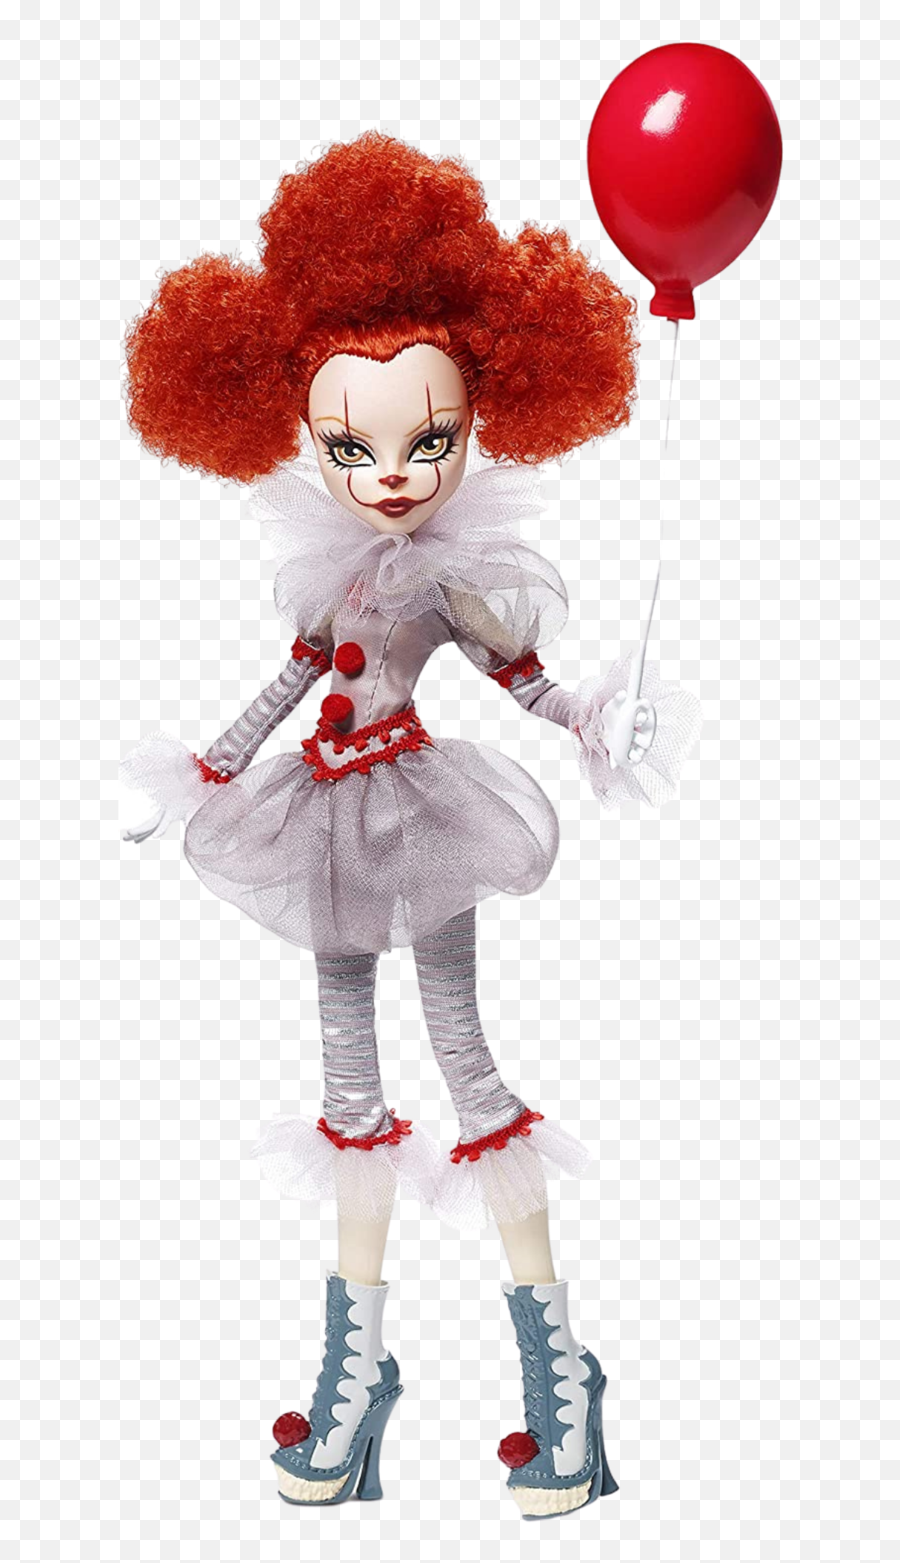 Best Selling Products U2013 Archies Toys - Monster High It Pennywise Collector Doll Emoji,Pennywise Emoji